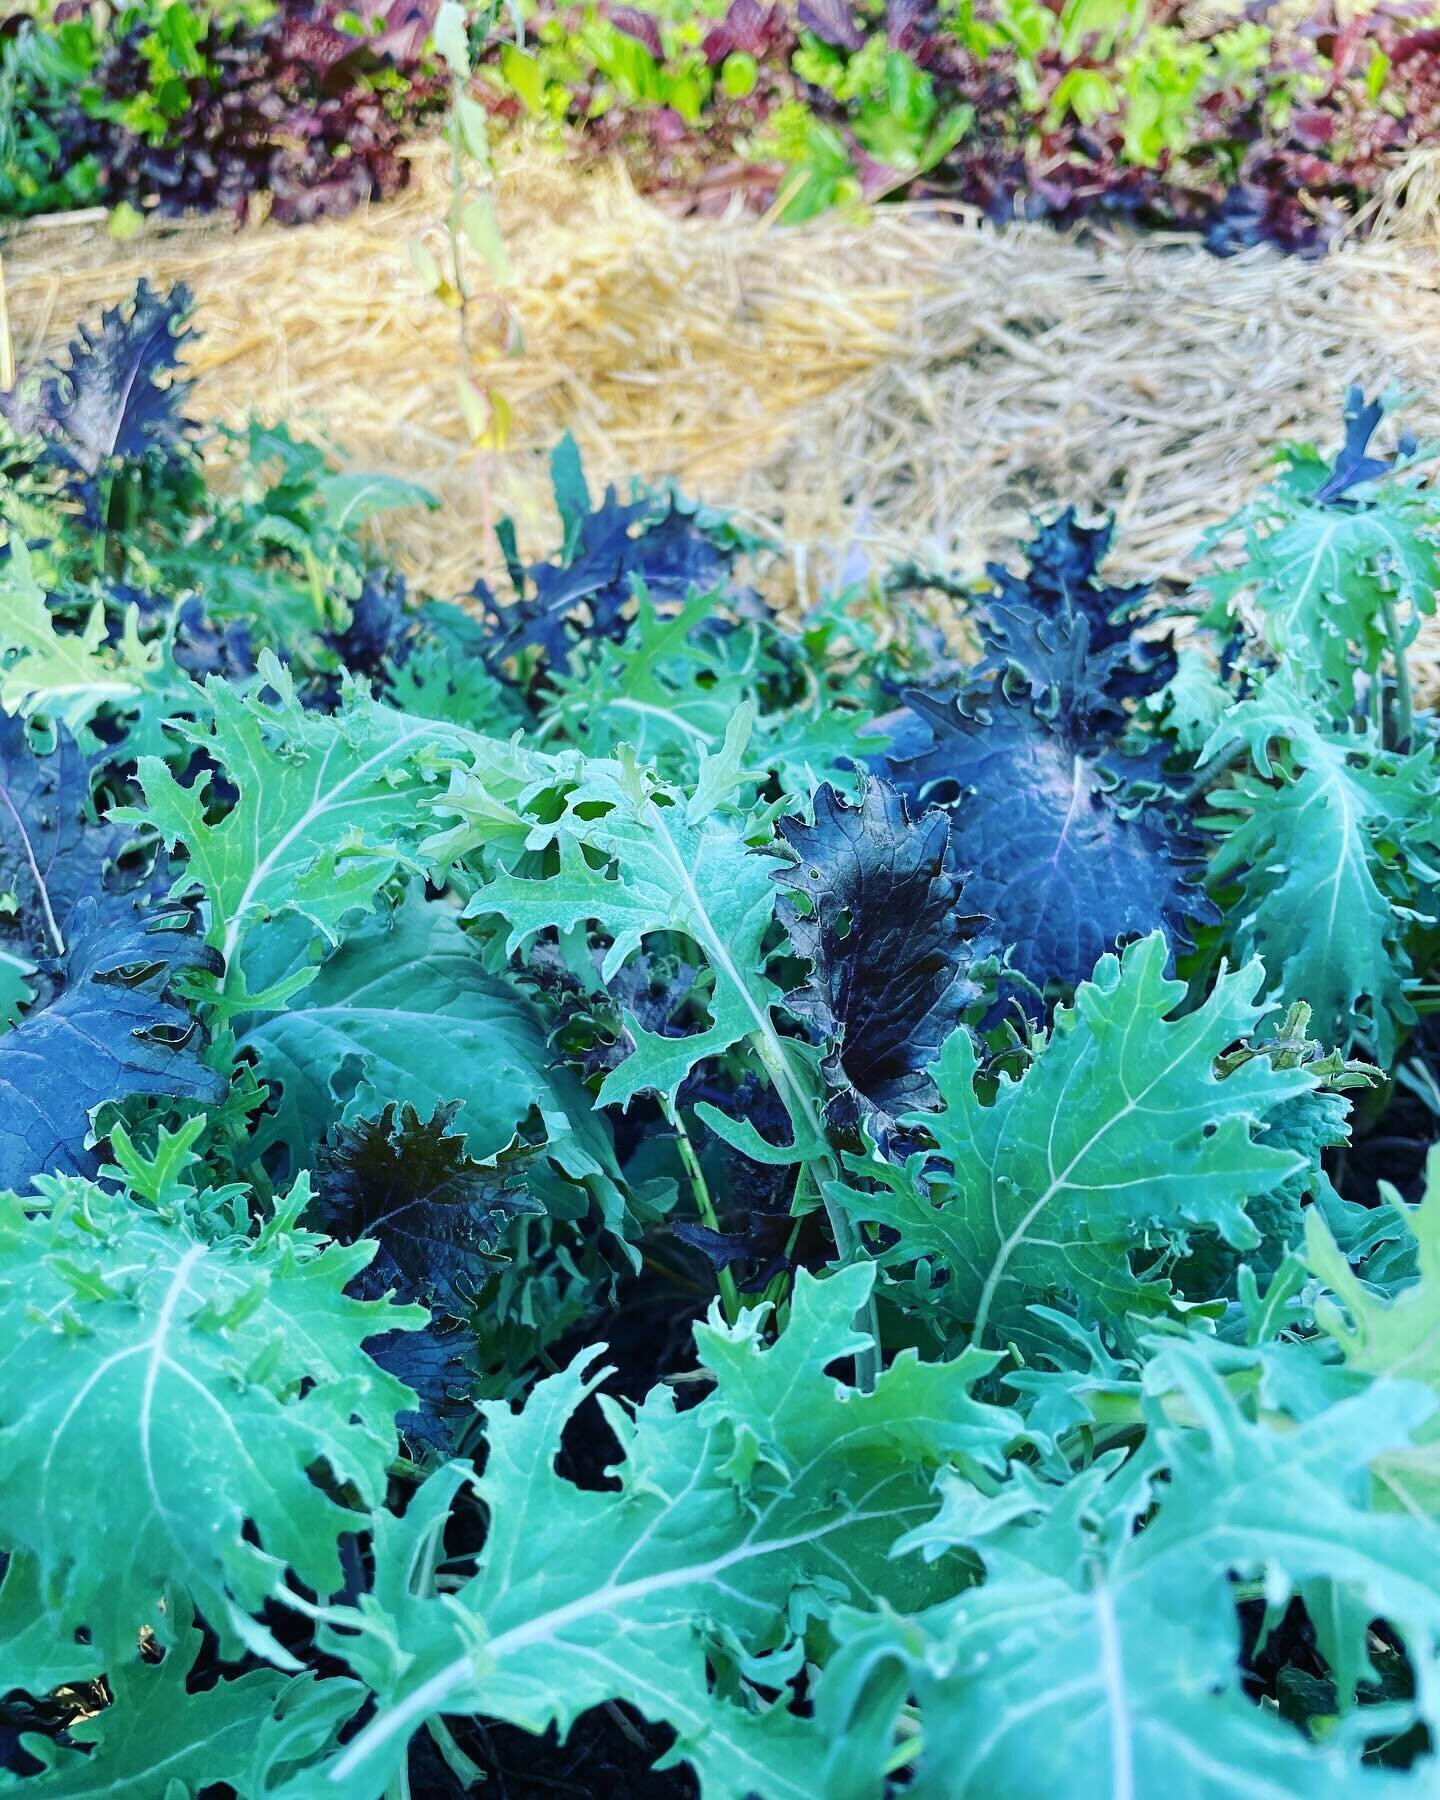 Veggie of the week&hellip;.. (insert drumroll) 
.
.
Kale! Come grab your pizza Saturday (tomorrow) and you can be eating this beautiful kale mix on your pizza. We promise it tastes good! Just harvested from our very own farm @olivebranchgardens_ 
.
.